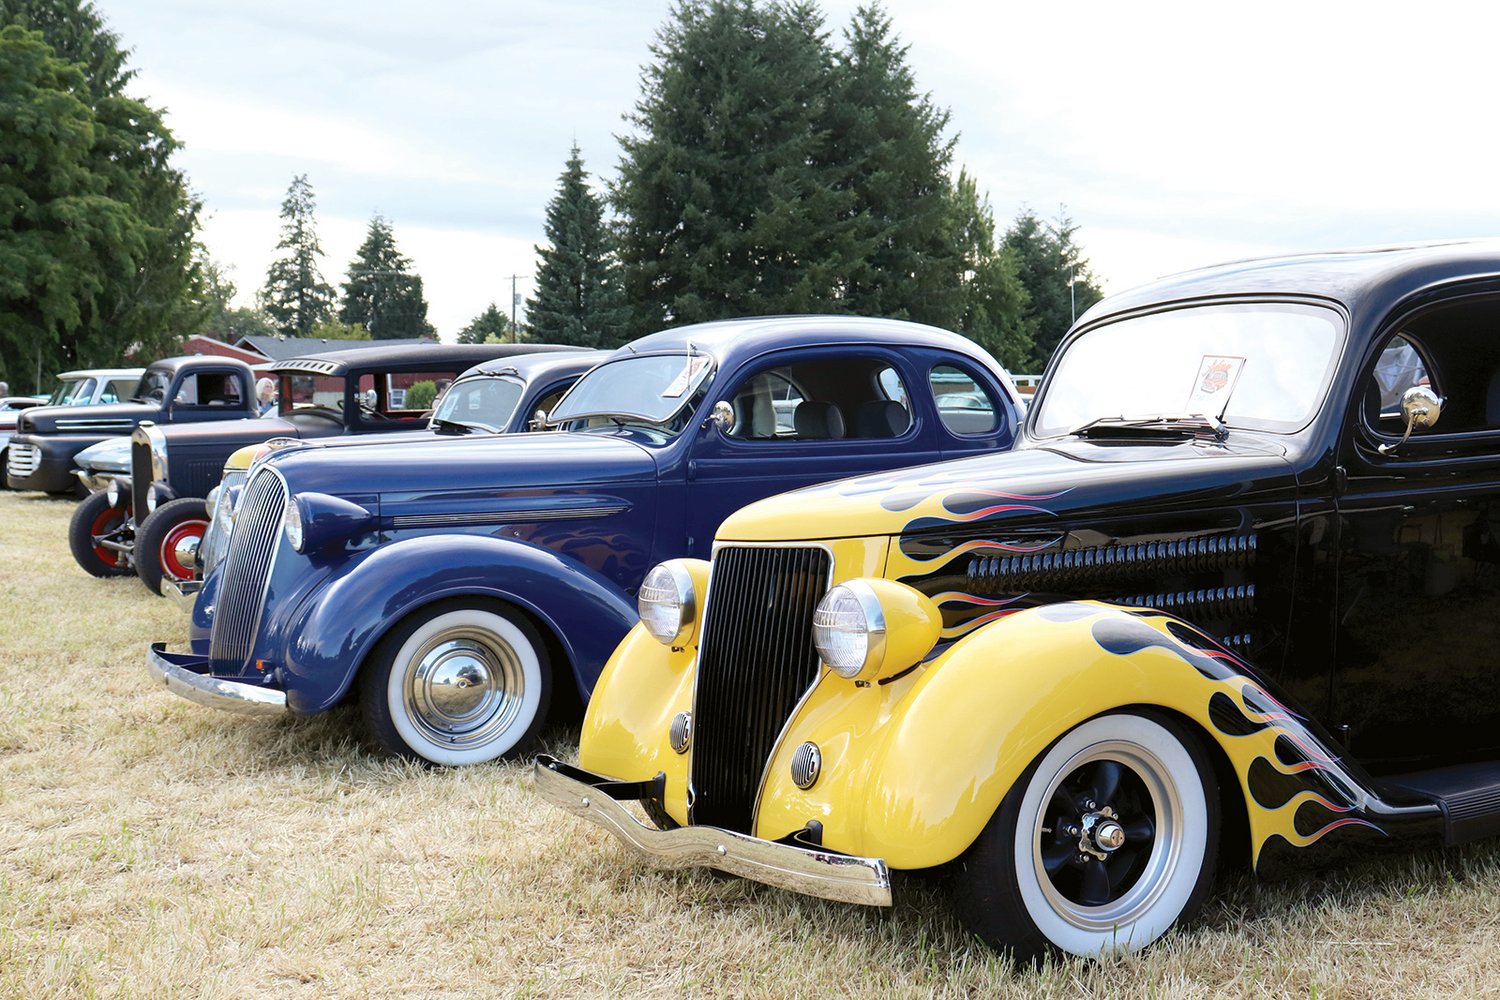 Vehicles are on display at the Adna Camp & Cruise Car Show in Adna on Friday.